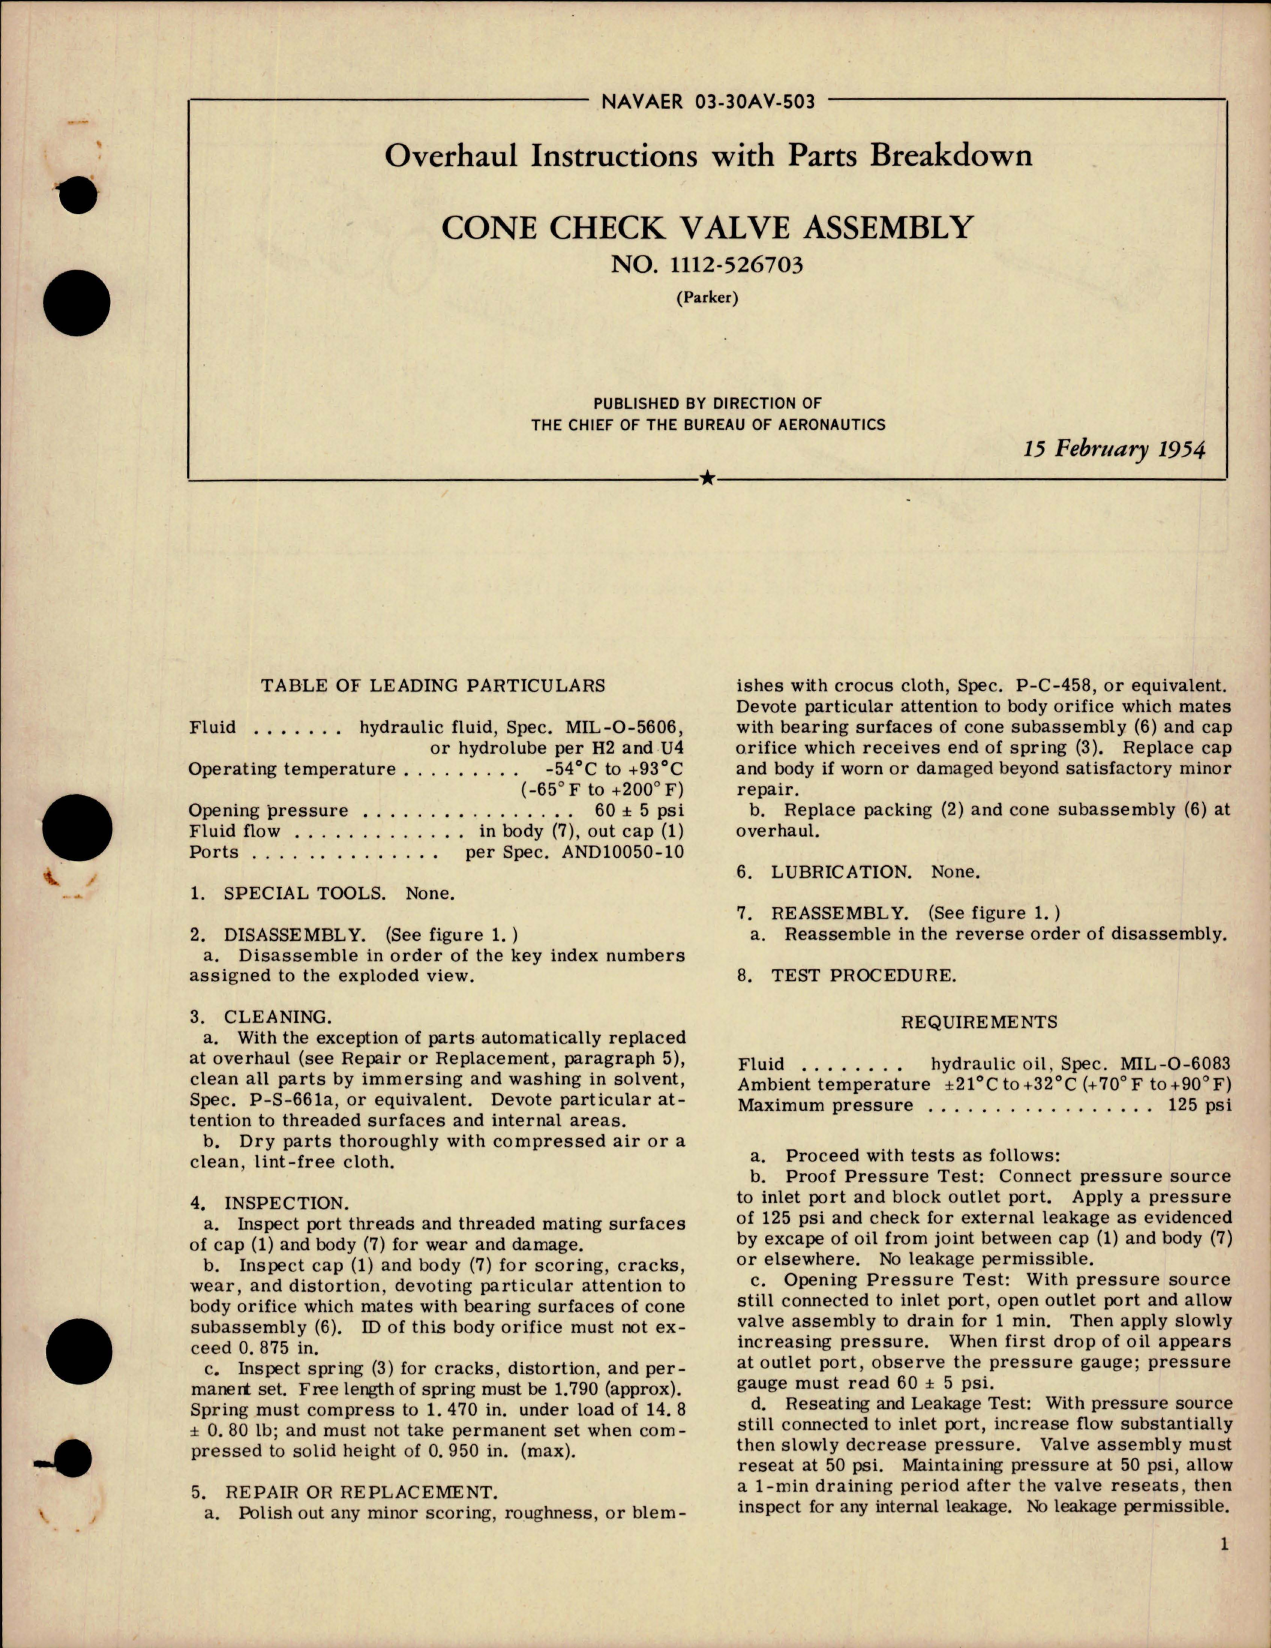 Sample page 1 from AirCorps Library document: Overhaul Instructions with Parts Breakdown for Cone Check Valve Assembly - 1112-526703